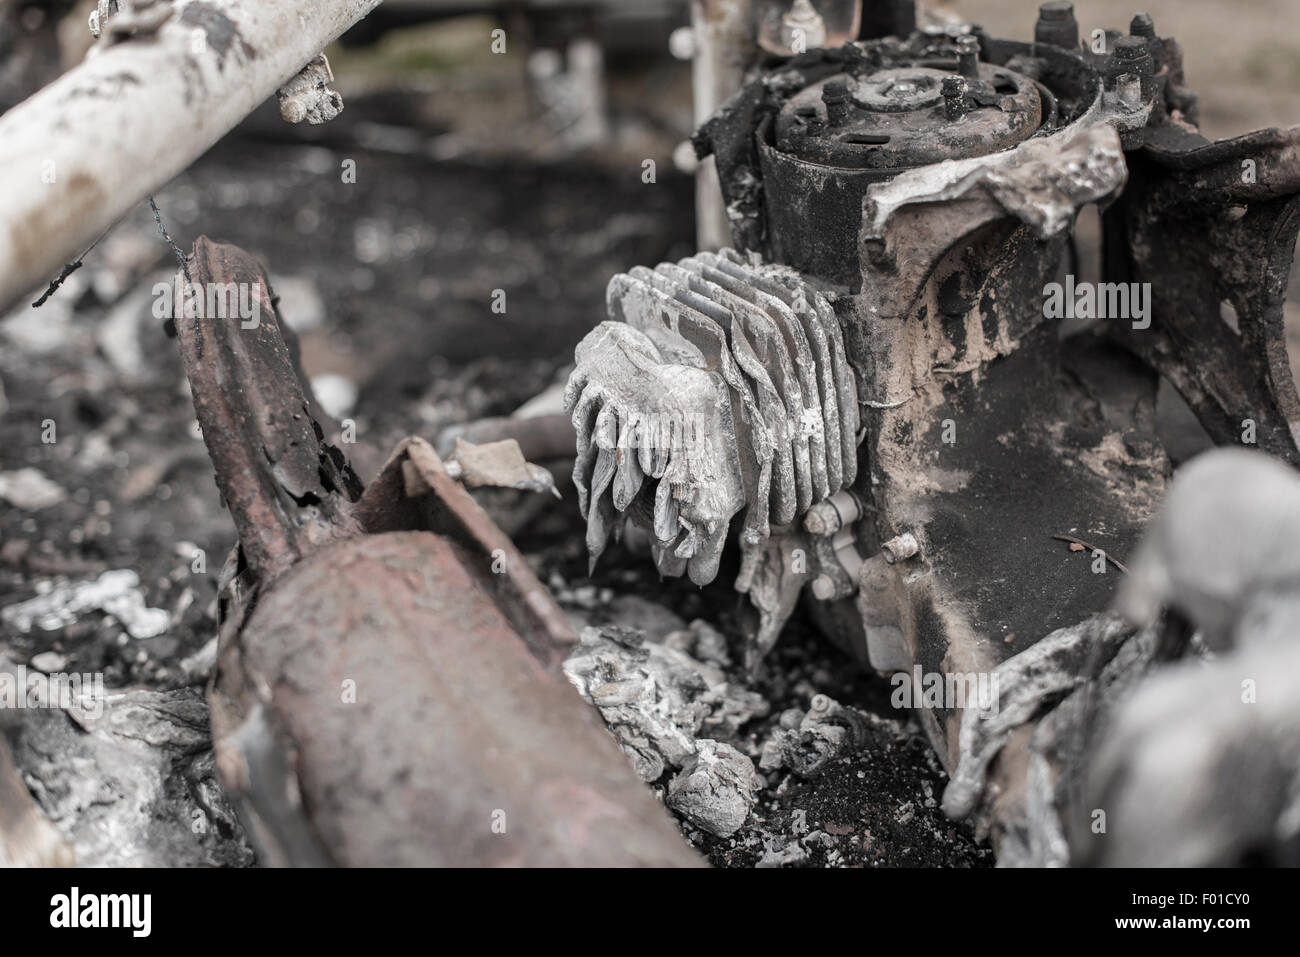 The burnt aftermath of a scooter fire Stock Photo